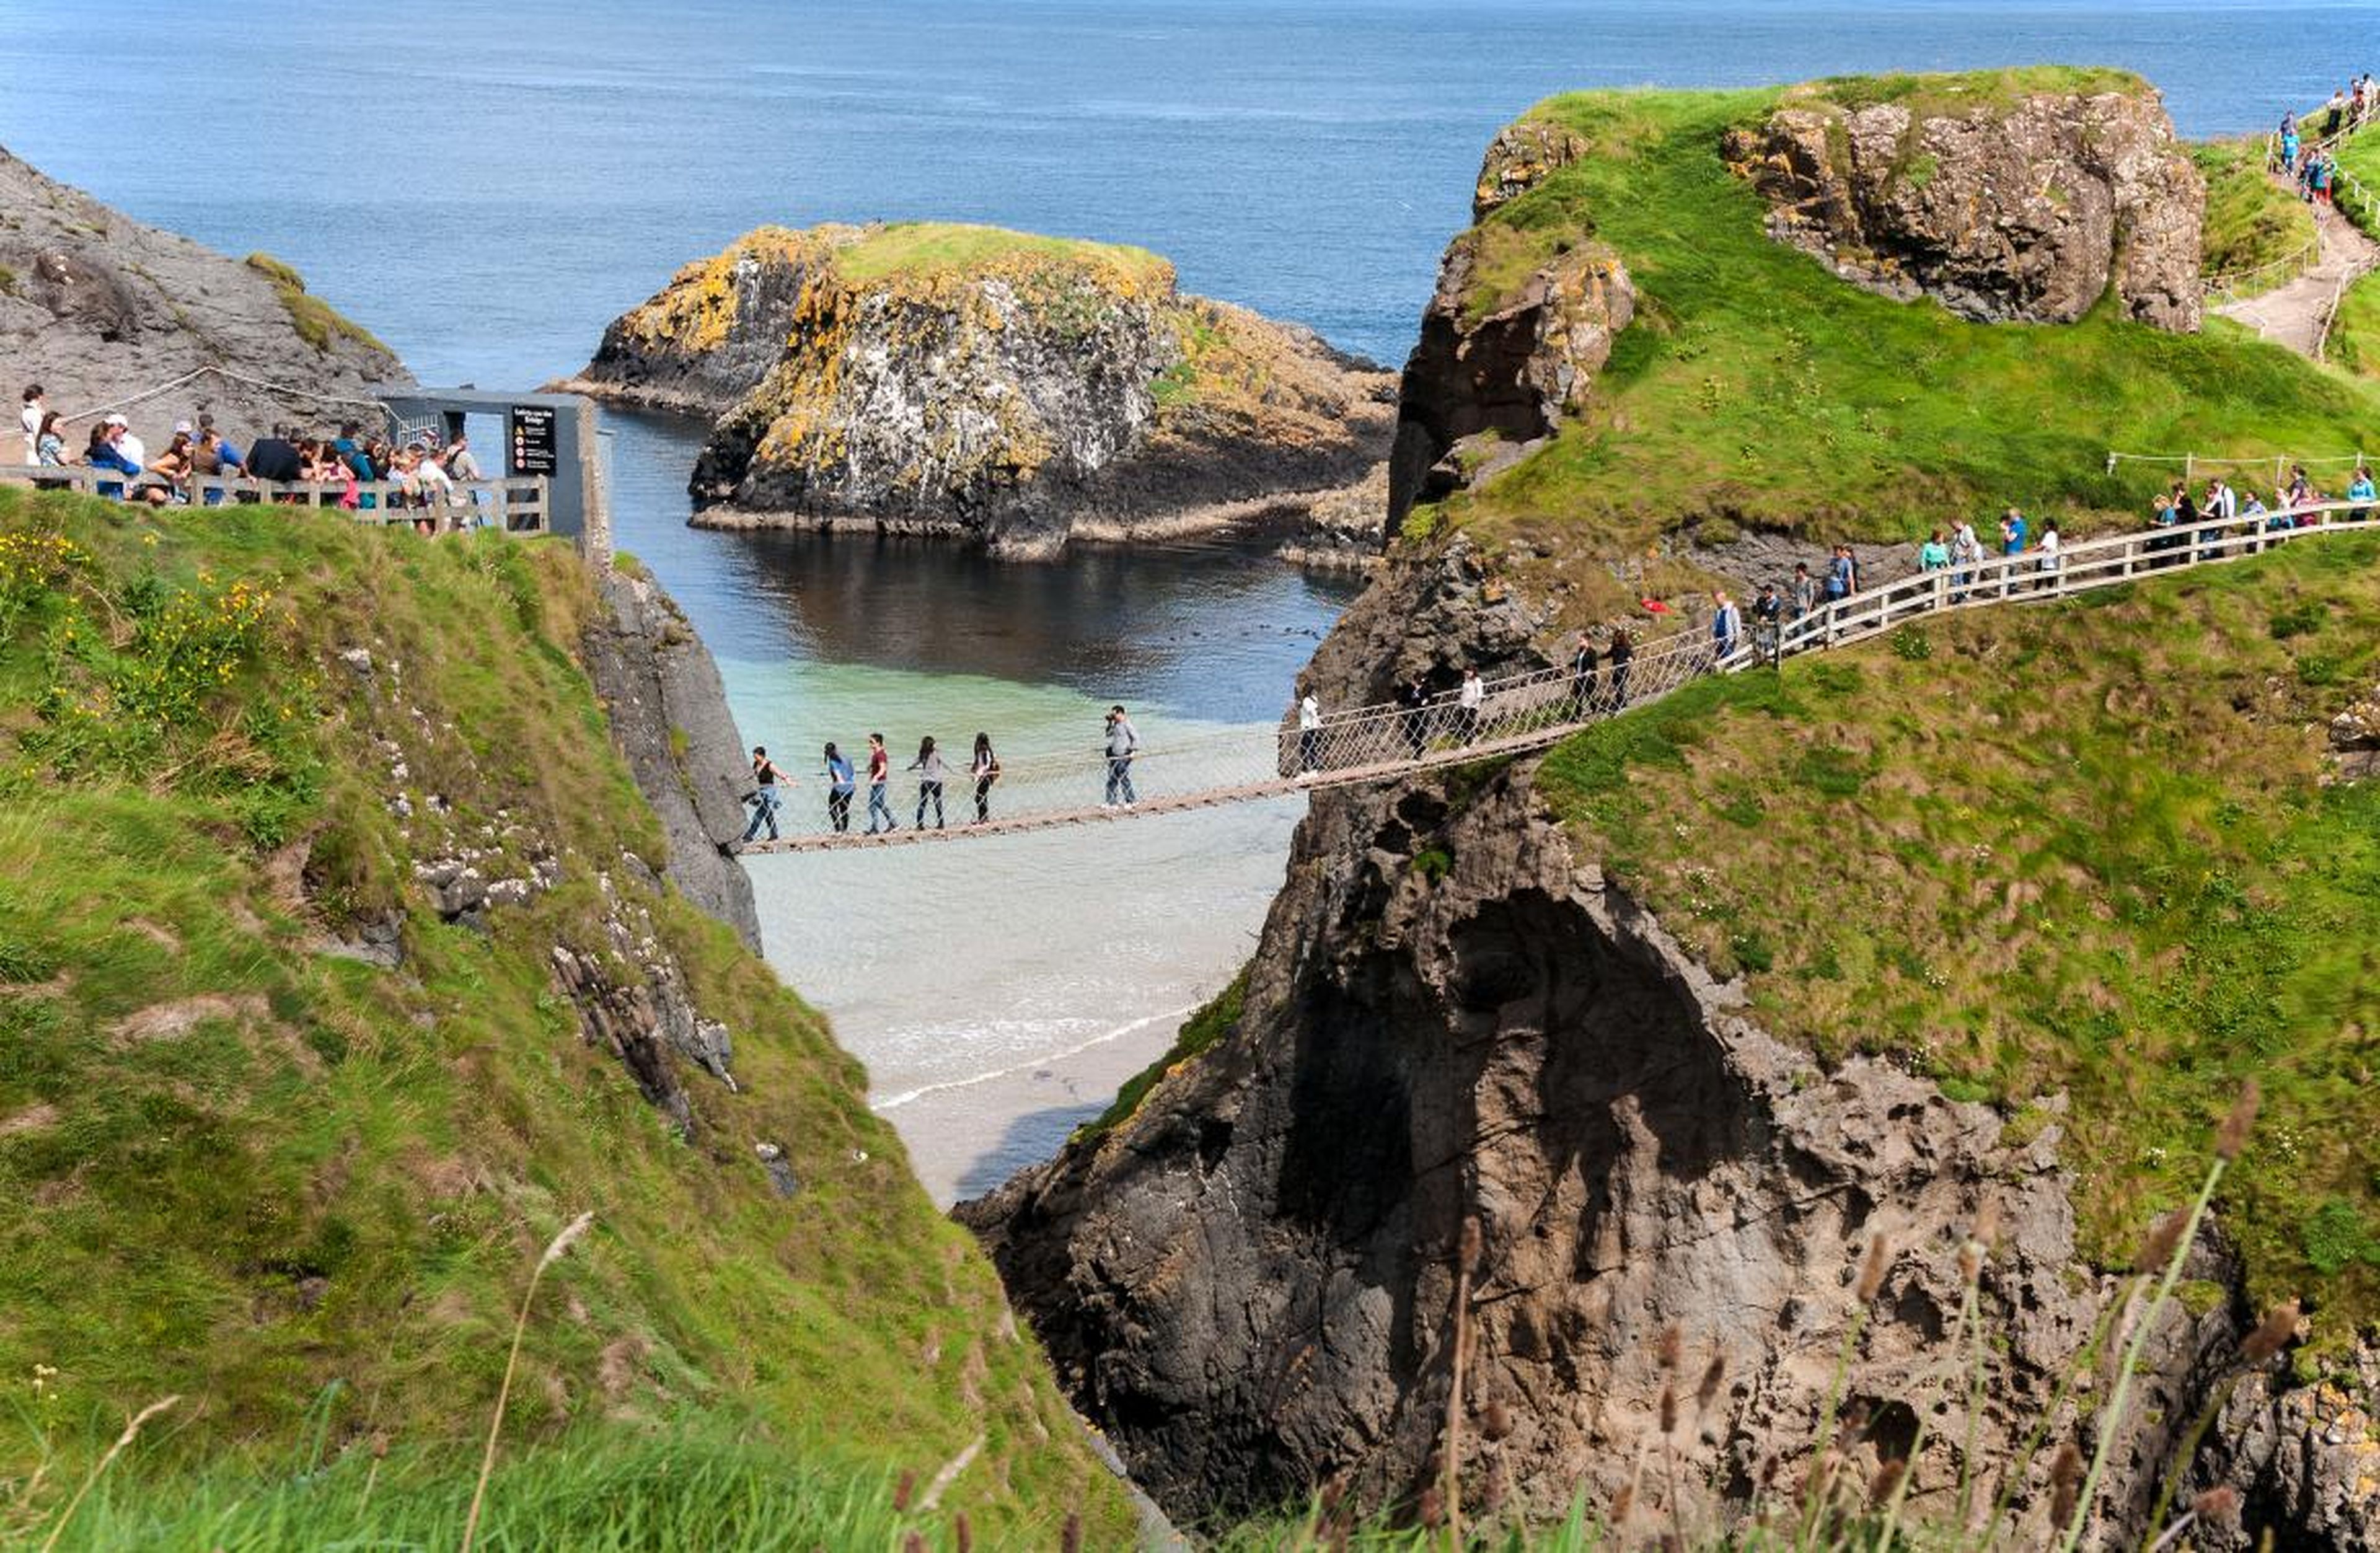 The Carrick-a-Rede Rope Bridge in Northern Ireland.